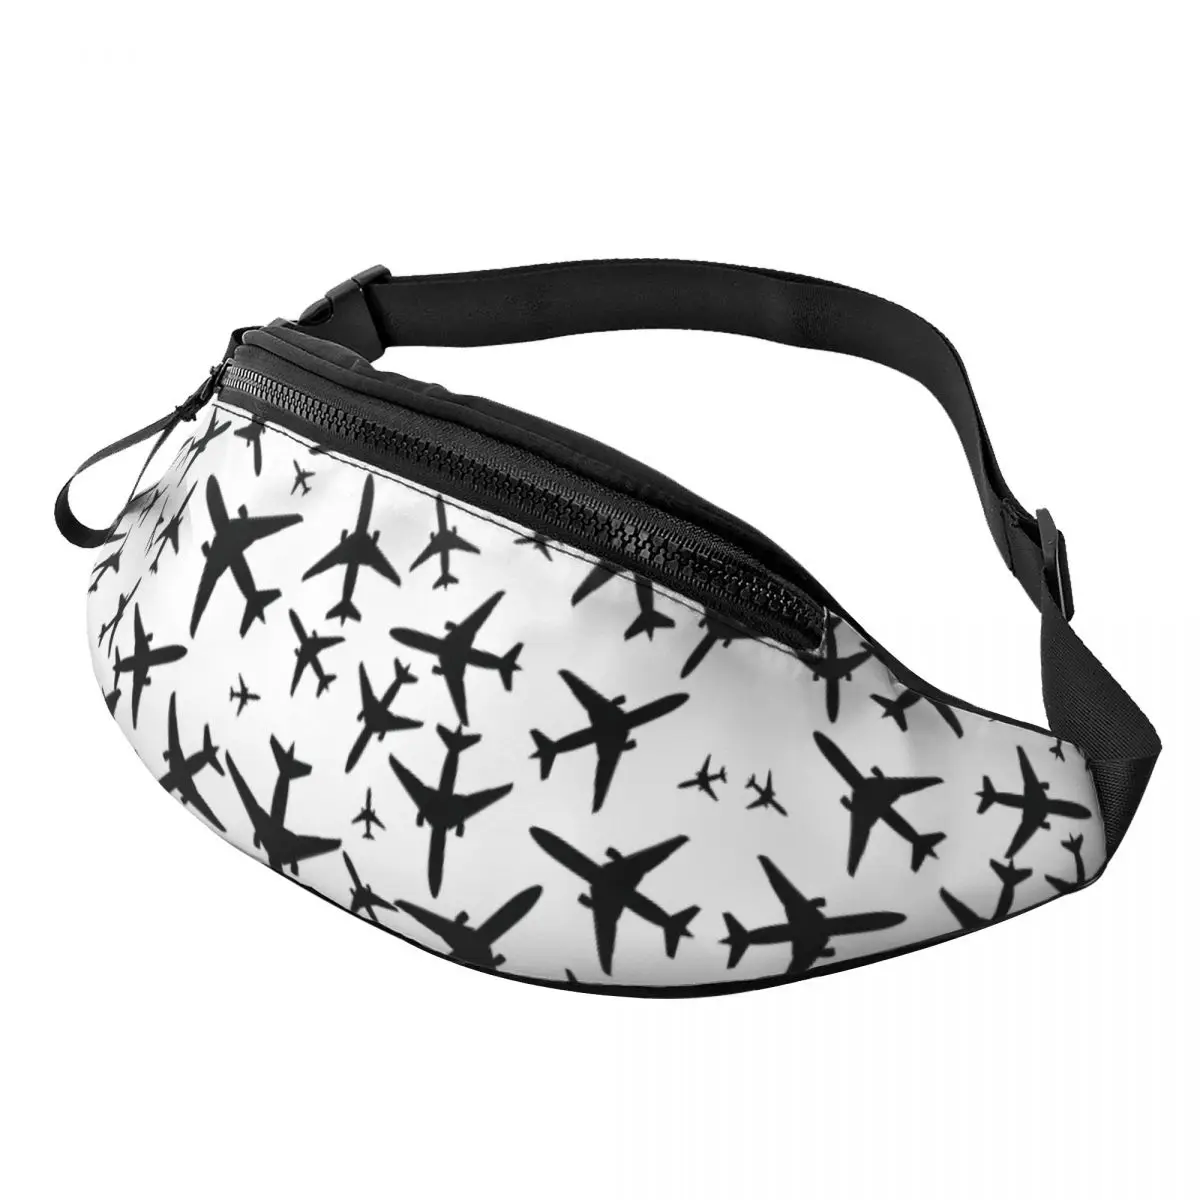 

Random Airplanes Pattern Fanny Pack Men Women Aviation Fighter Pilot Crossbody Waist Bag for Cycling Camping Phone Money Pouch